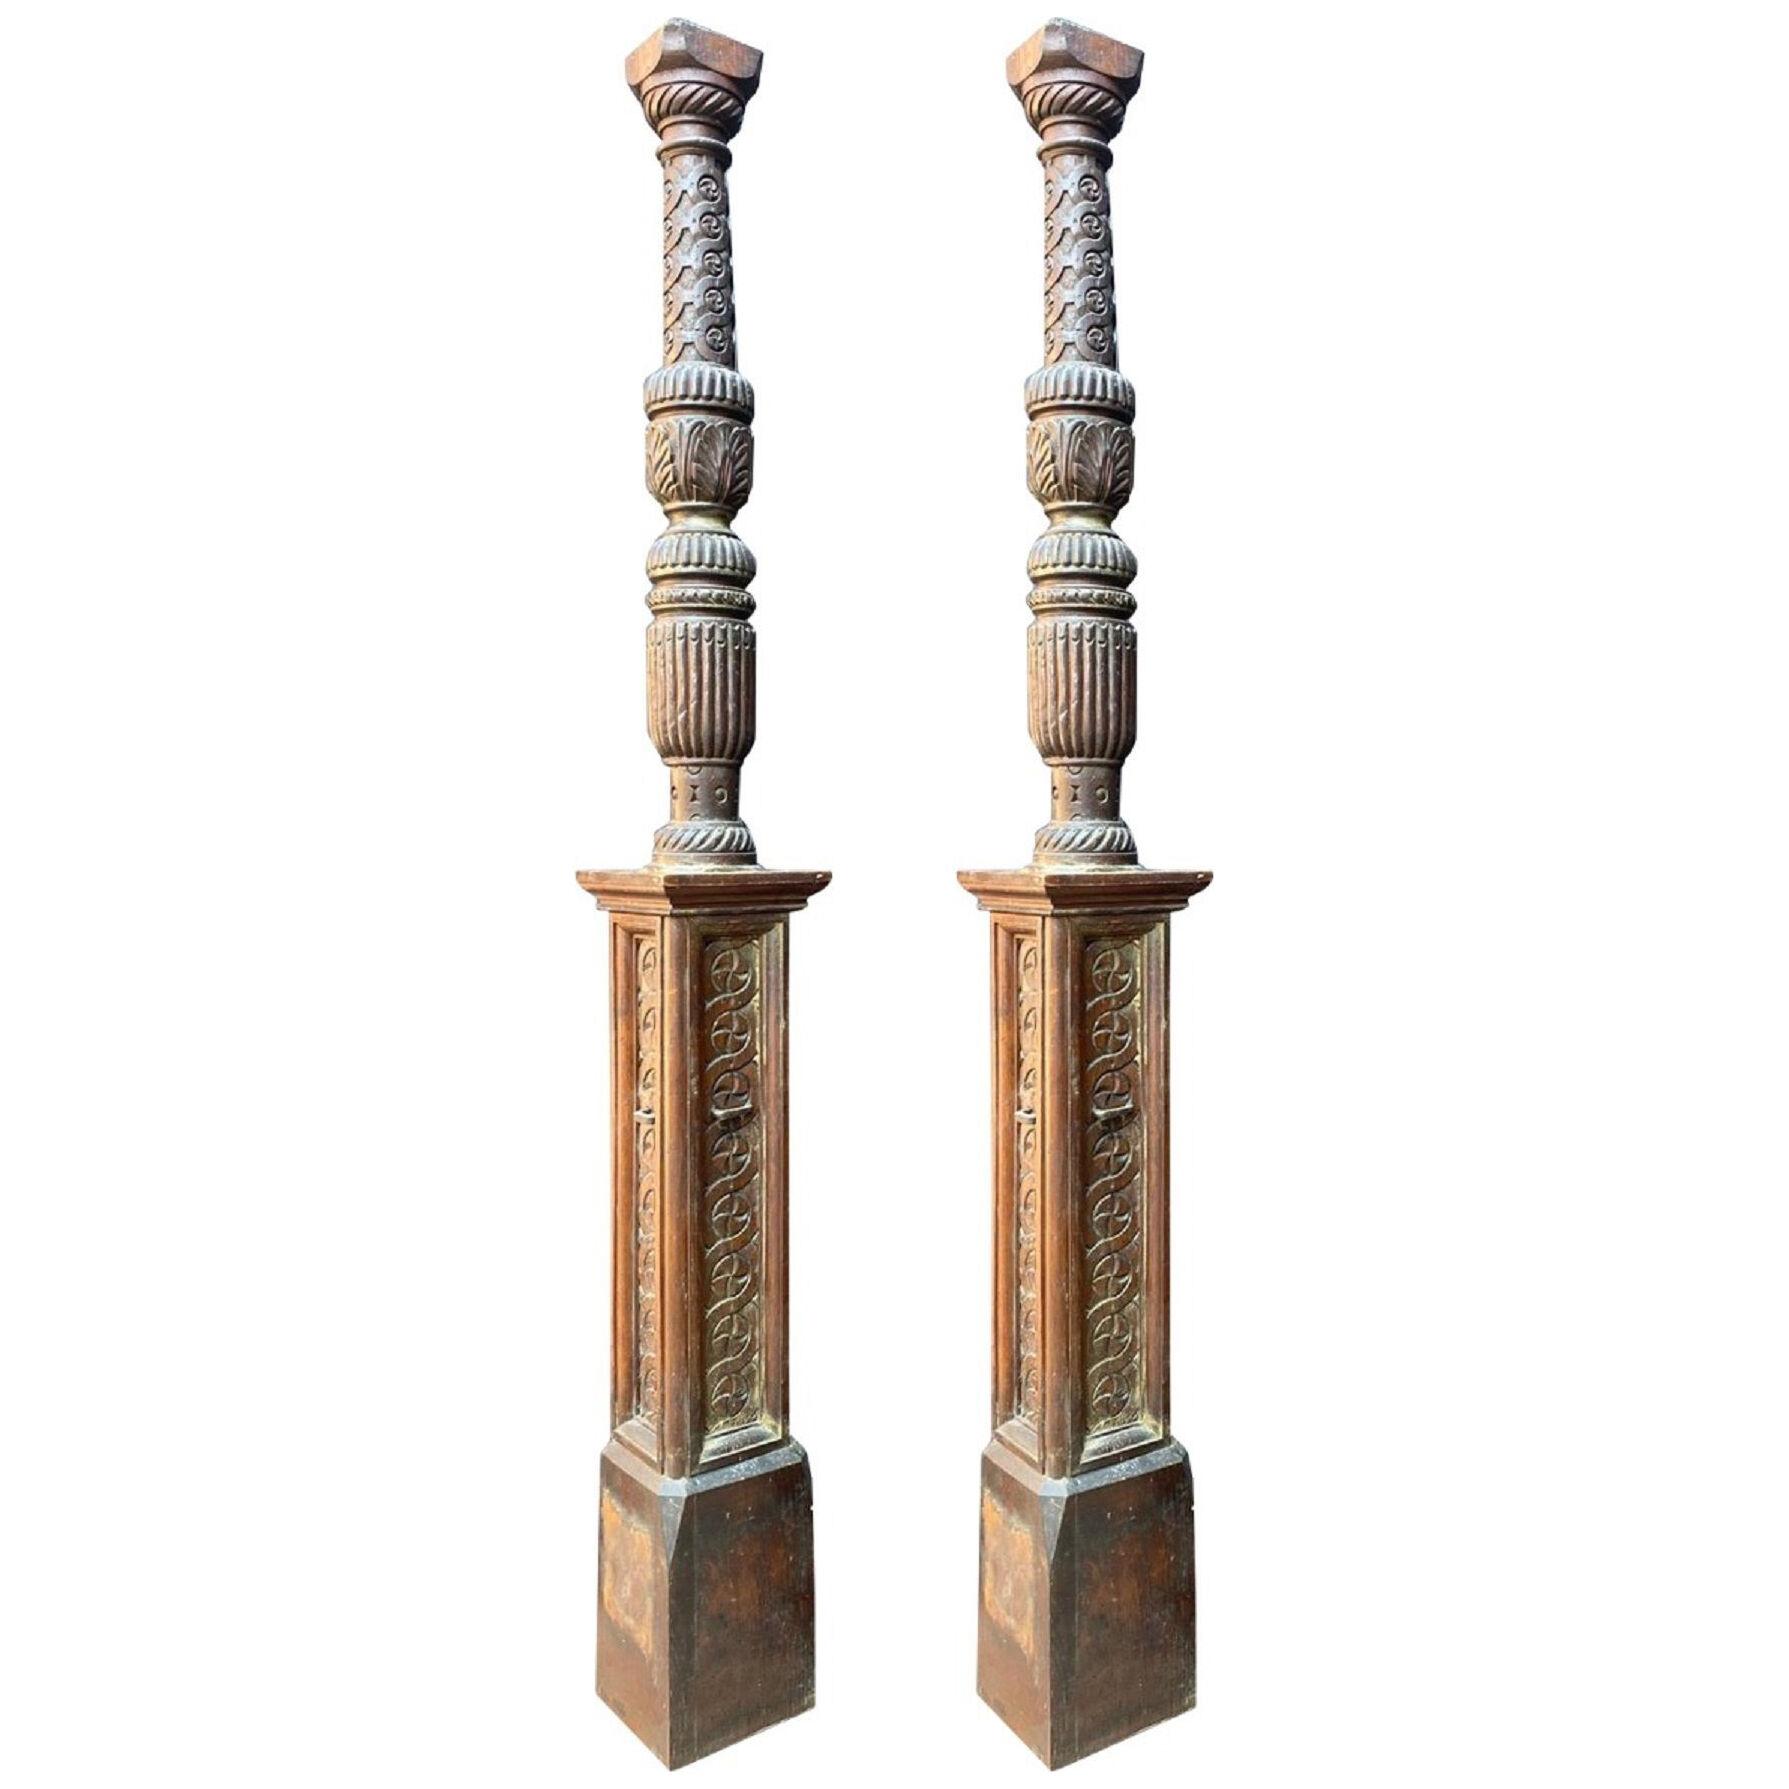 A Pair of Tudor Period Carved Oak Bed Posts